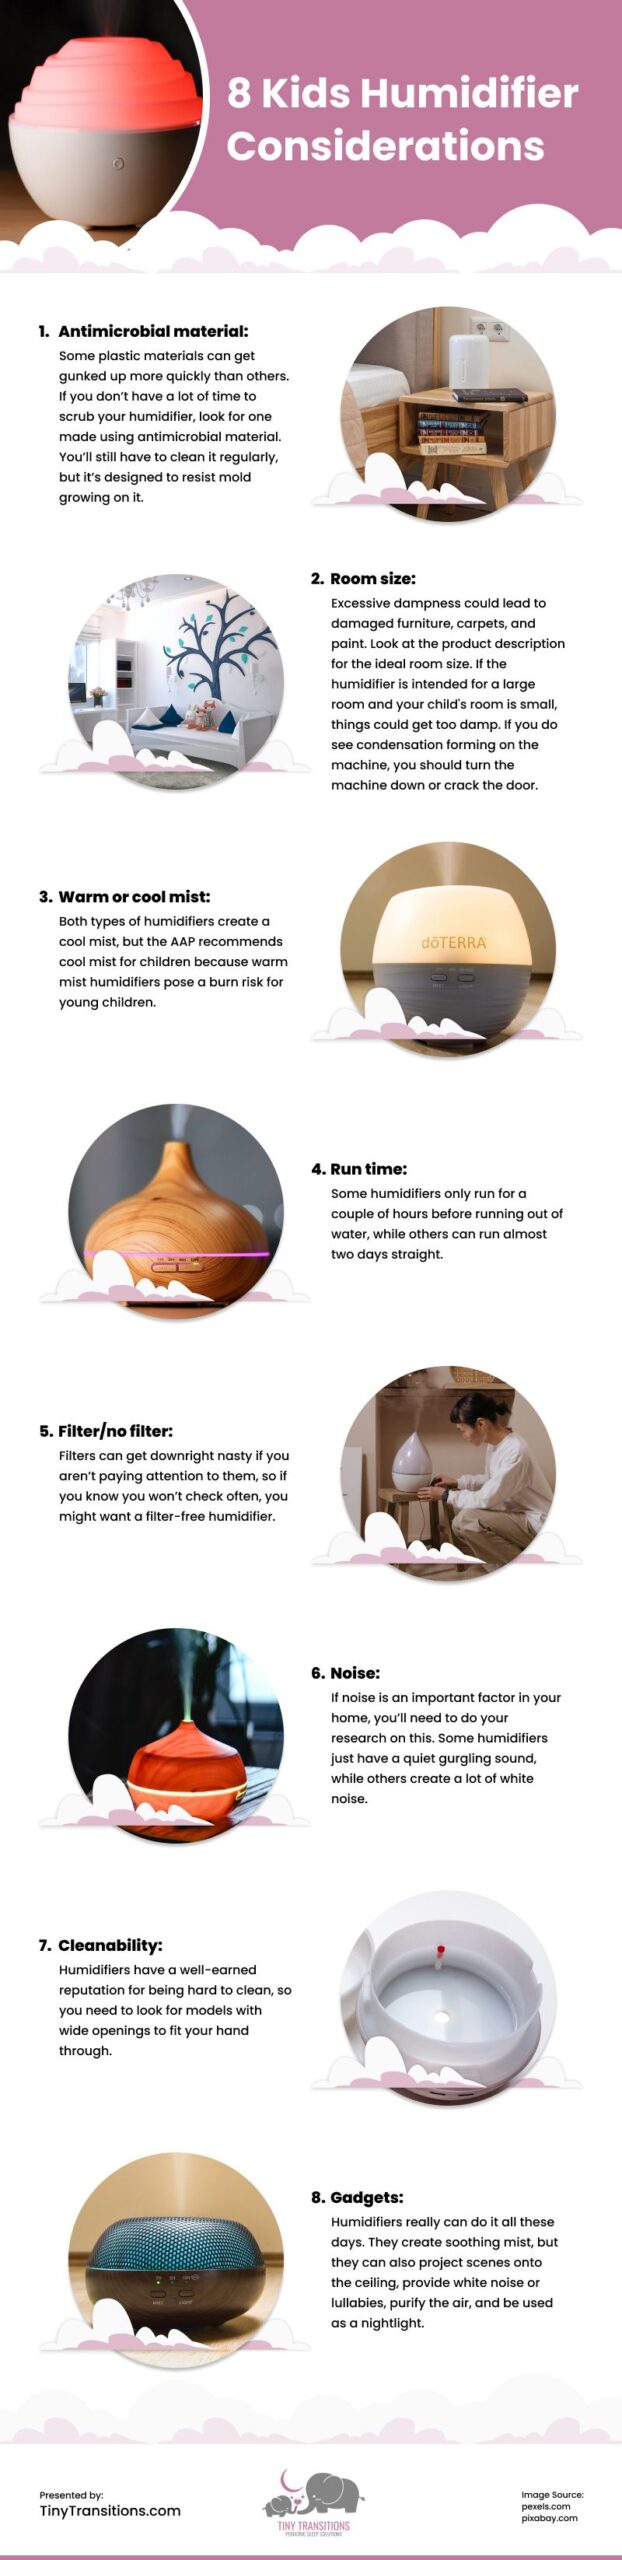 8 Kids Humidifier Considerations Infographic